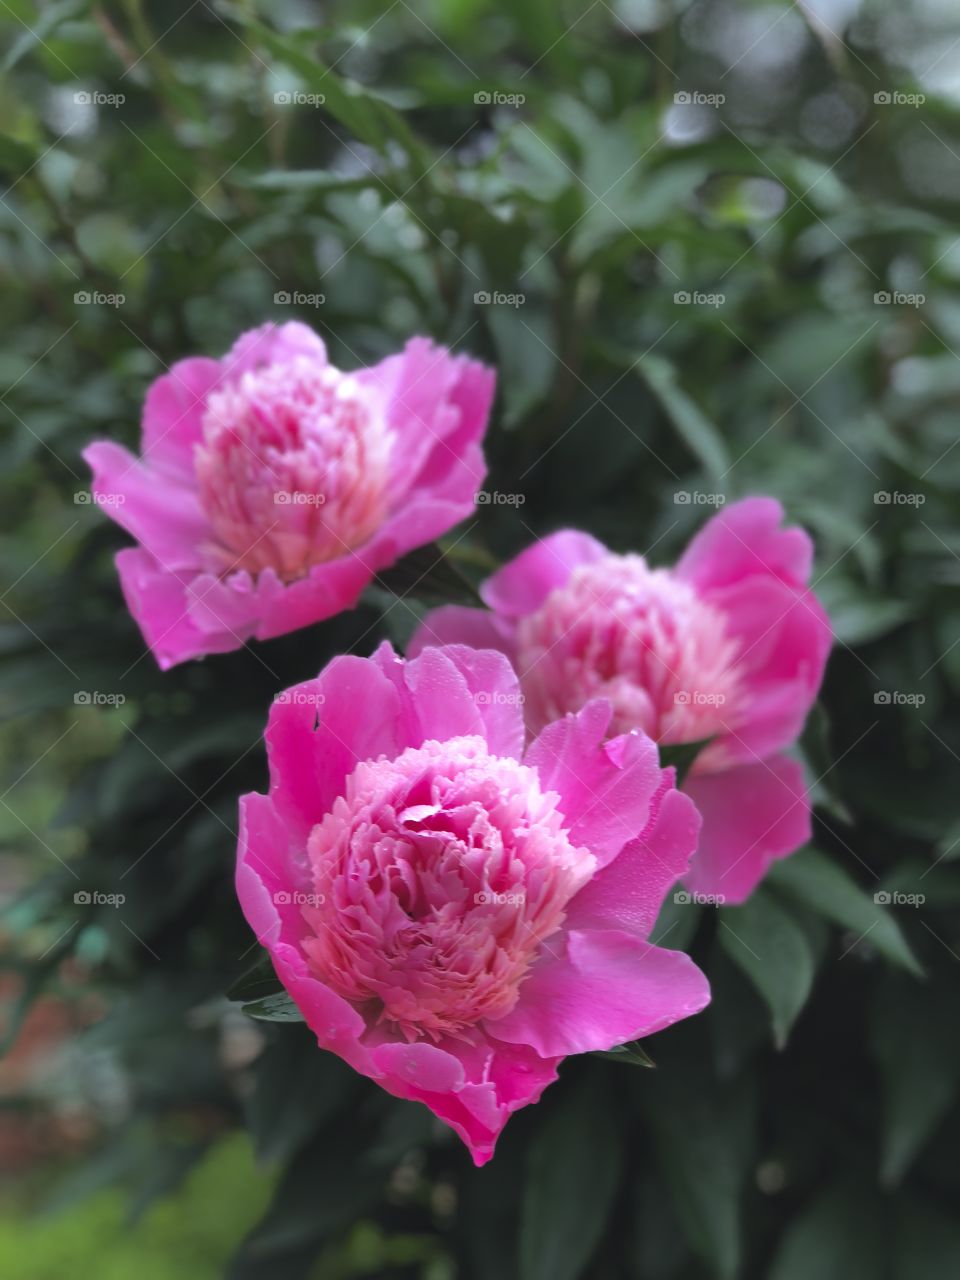 Beautiful flowers that just blossomed but so attractive for it crispy pink petals.